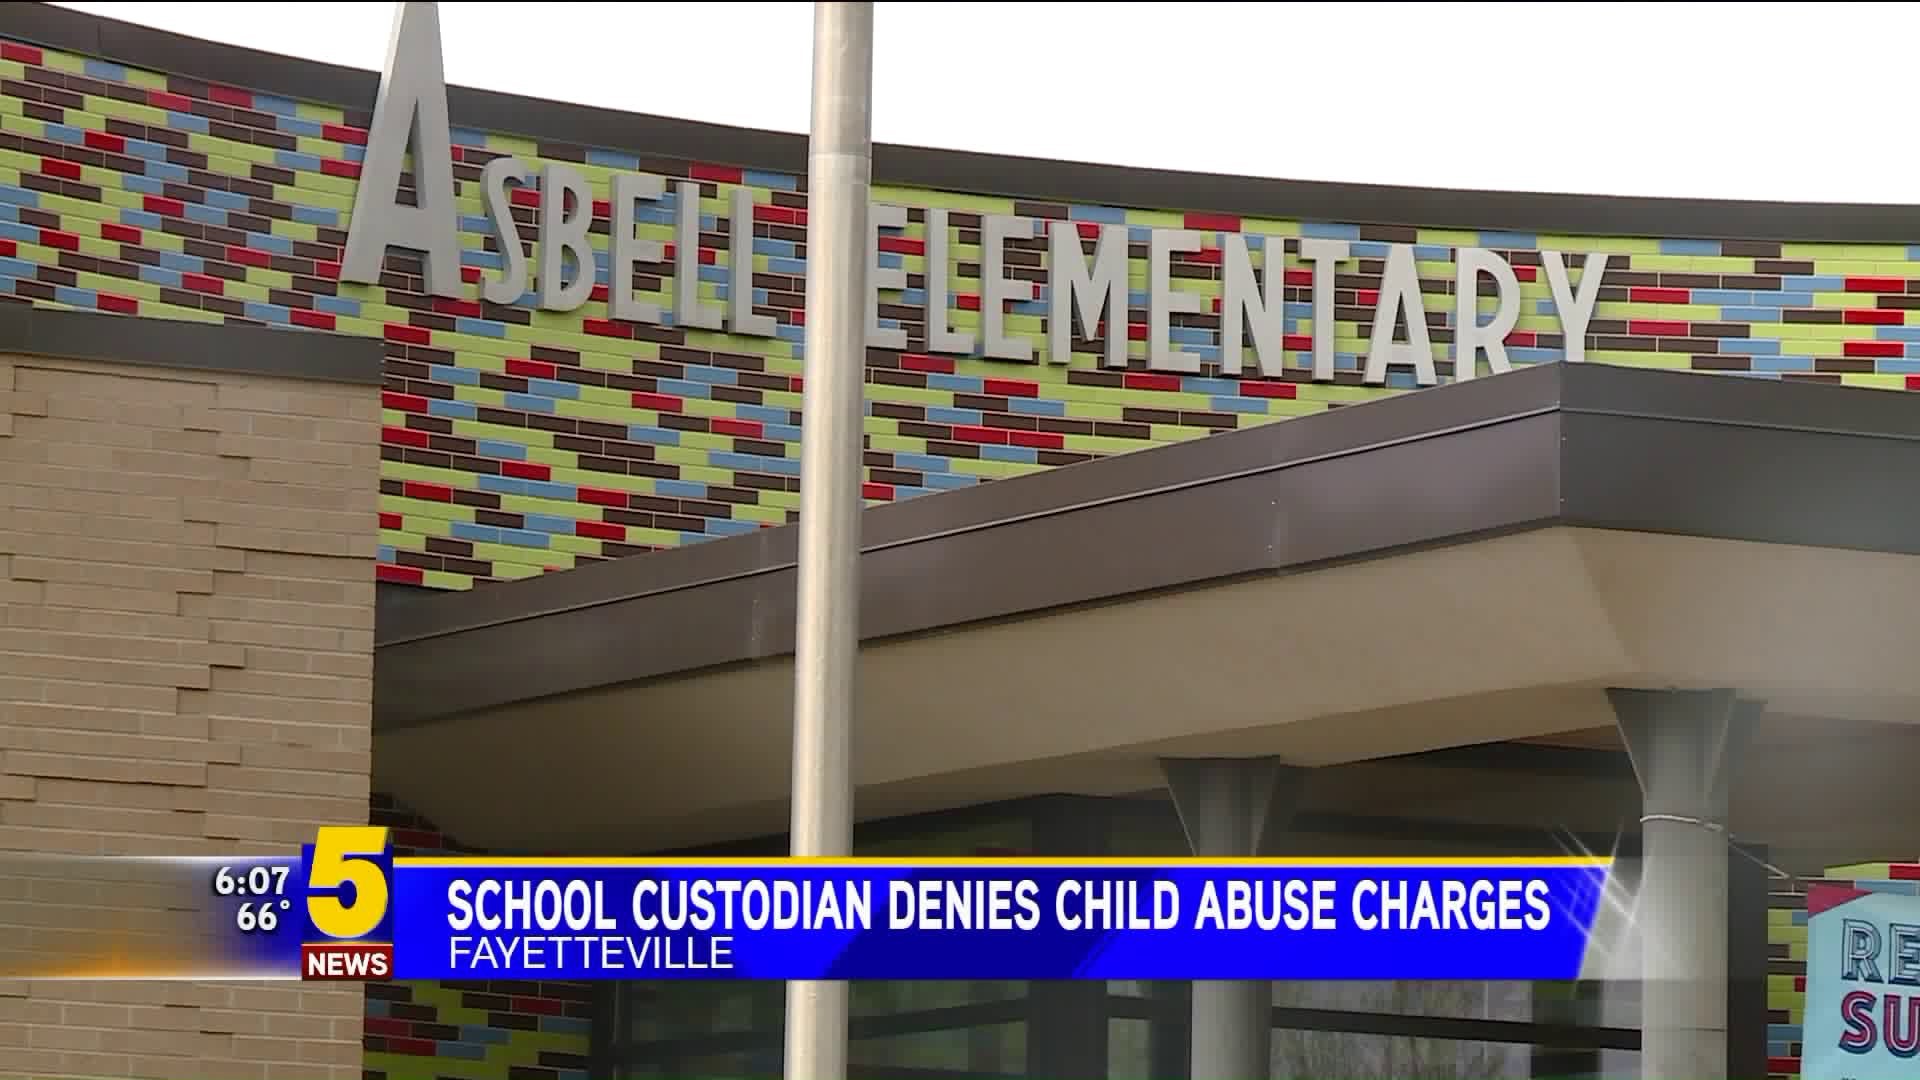 School Custodian Denies Child Abuse Charges